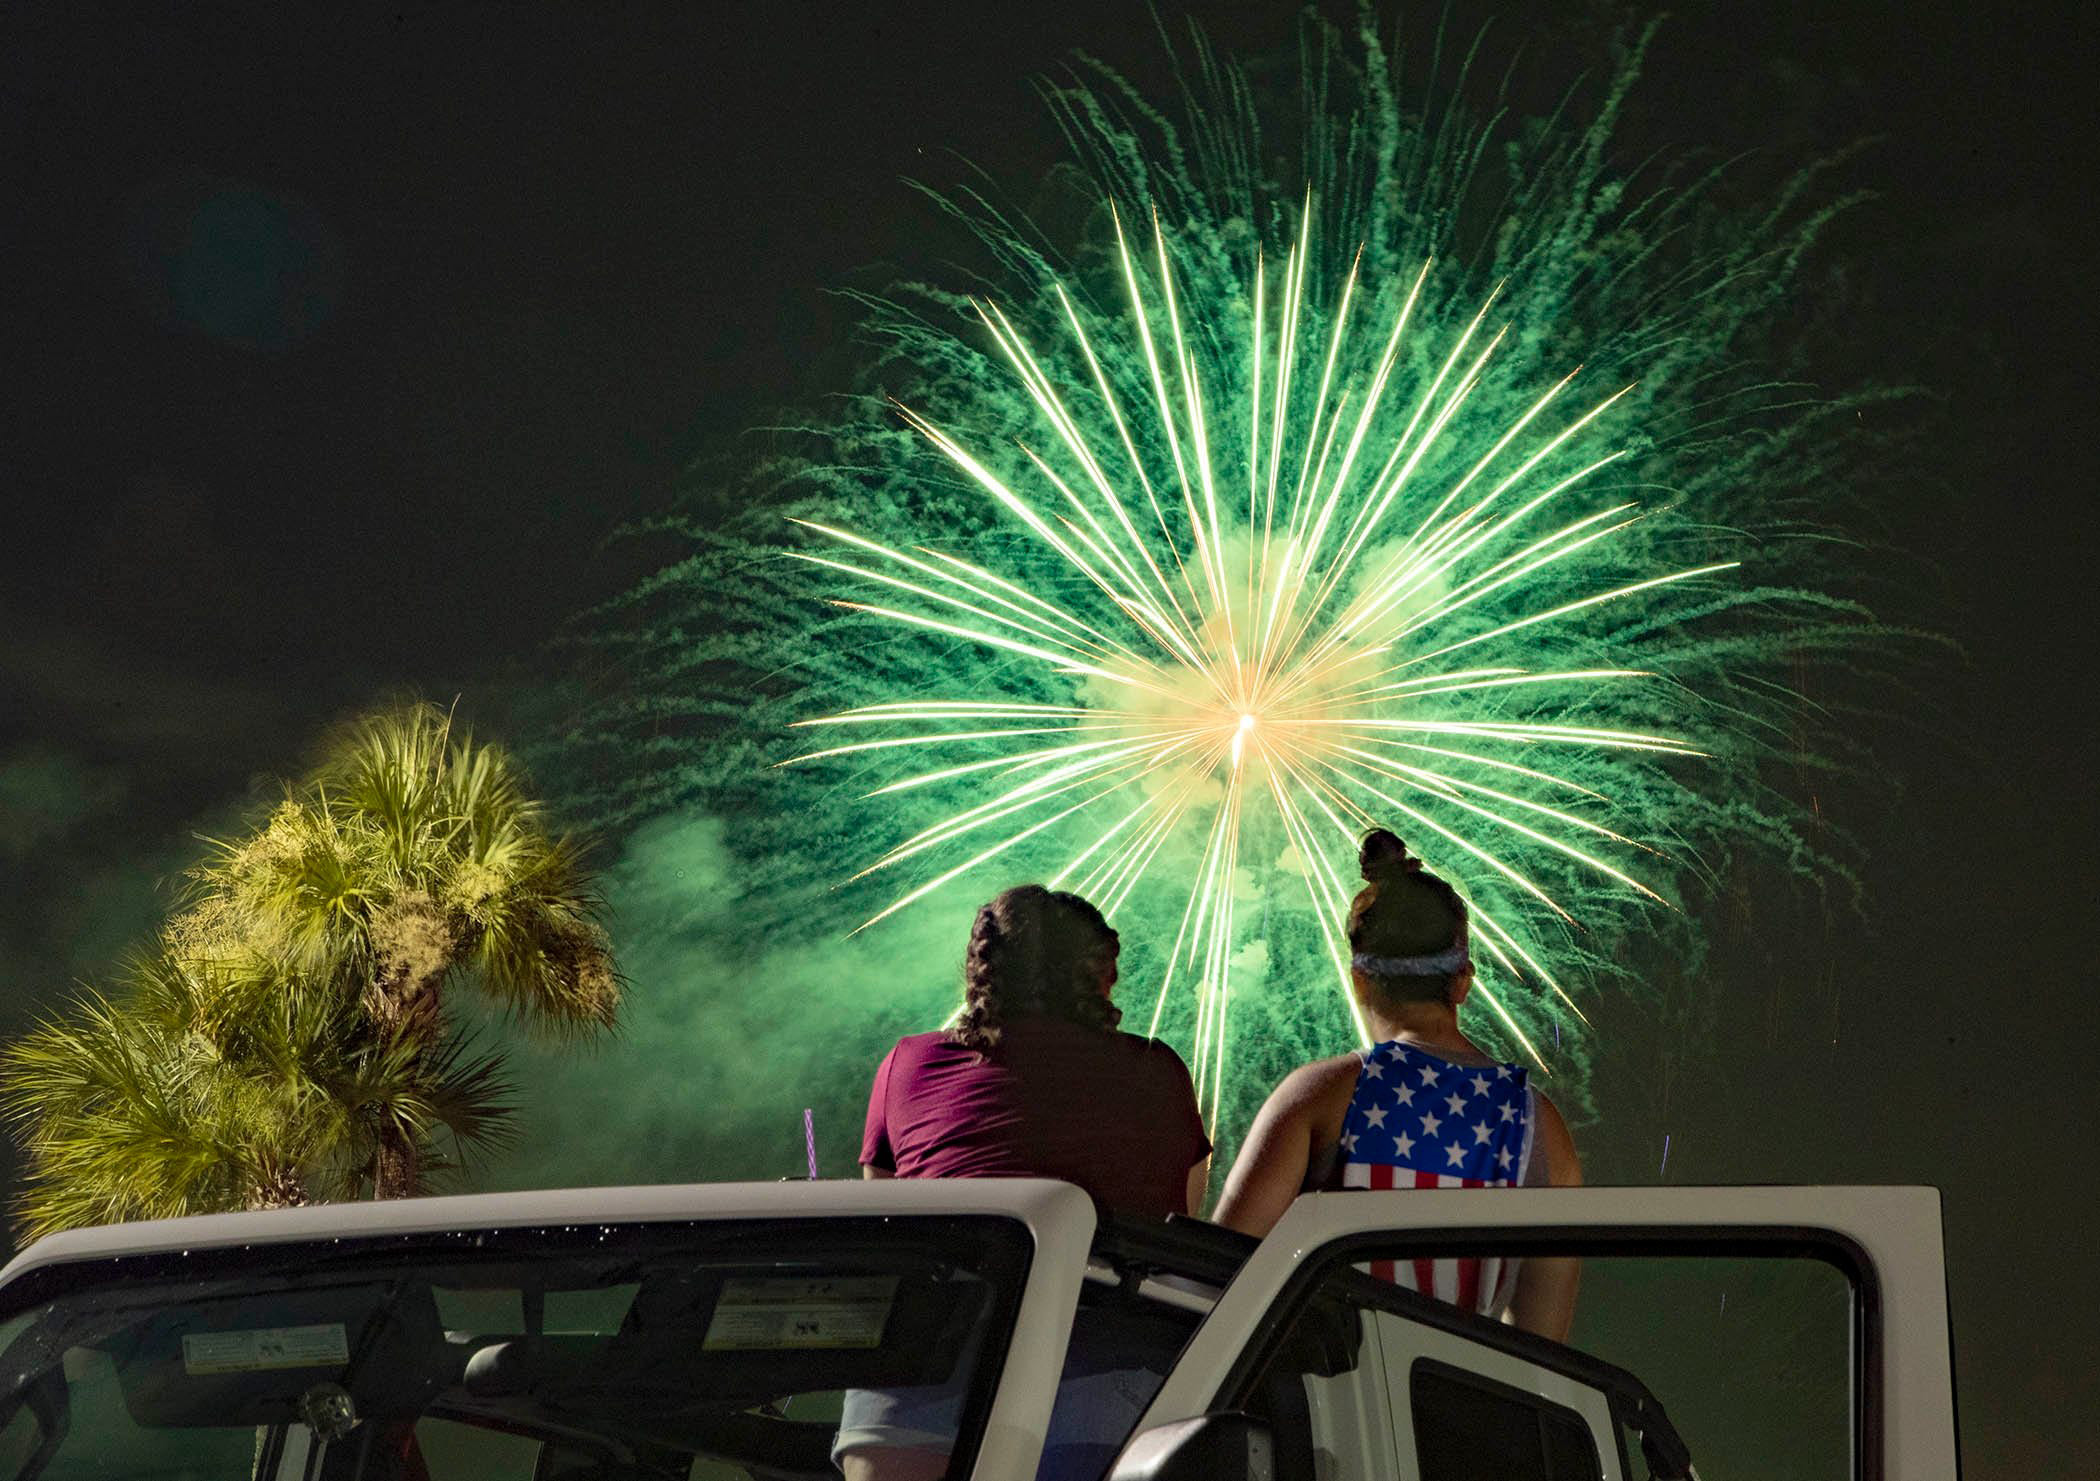 PHOTO: In this undated file photo, people watch fireworks during a Fourth of July celebration.